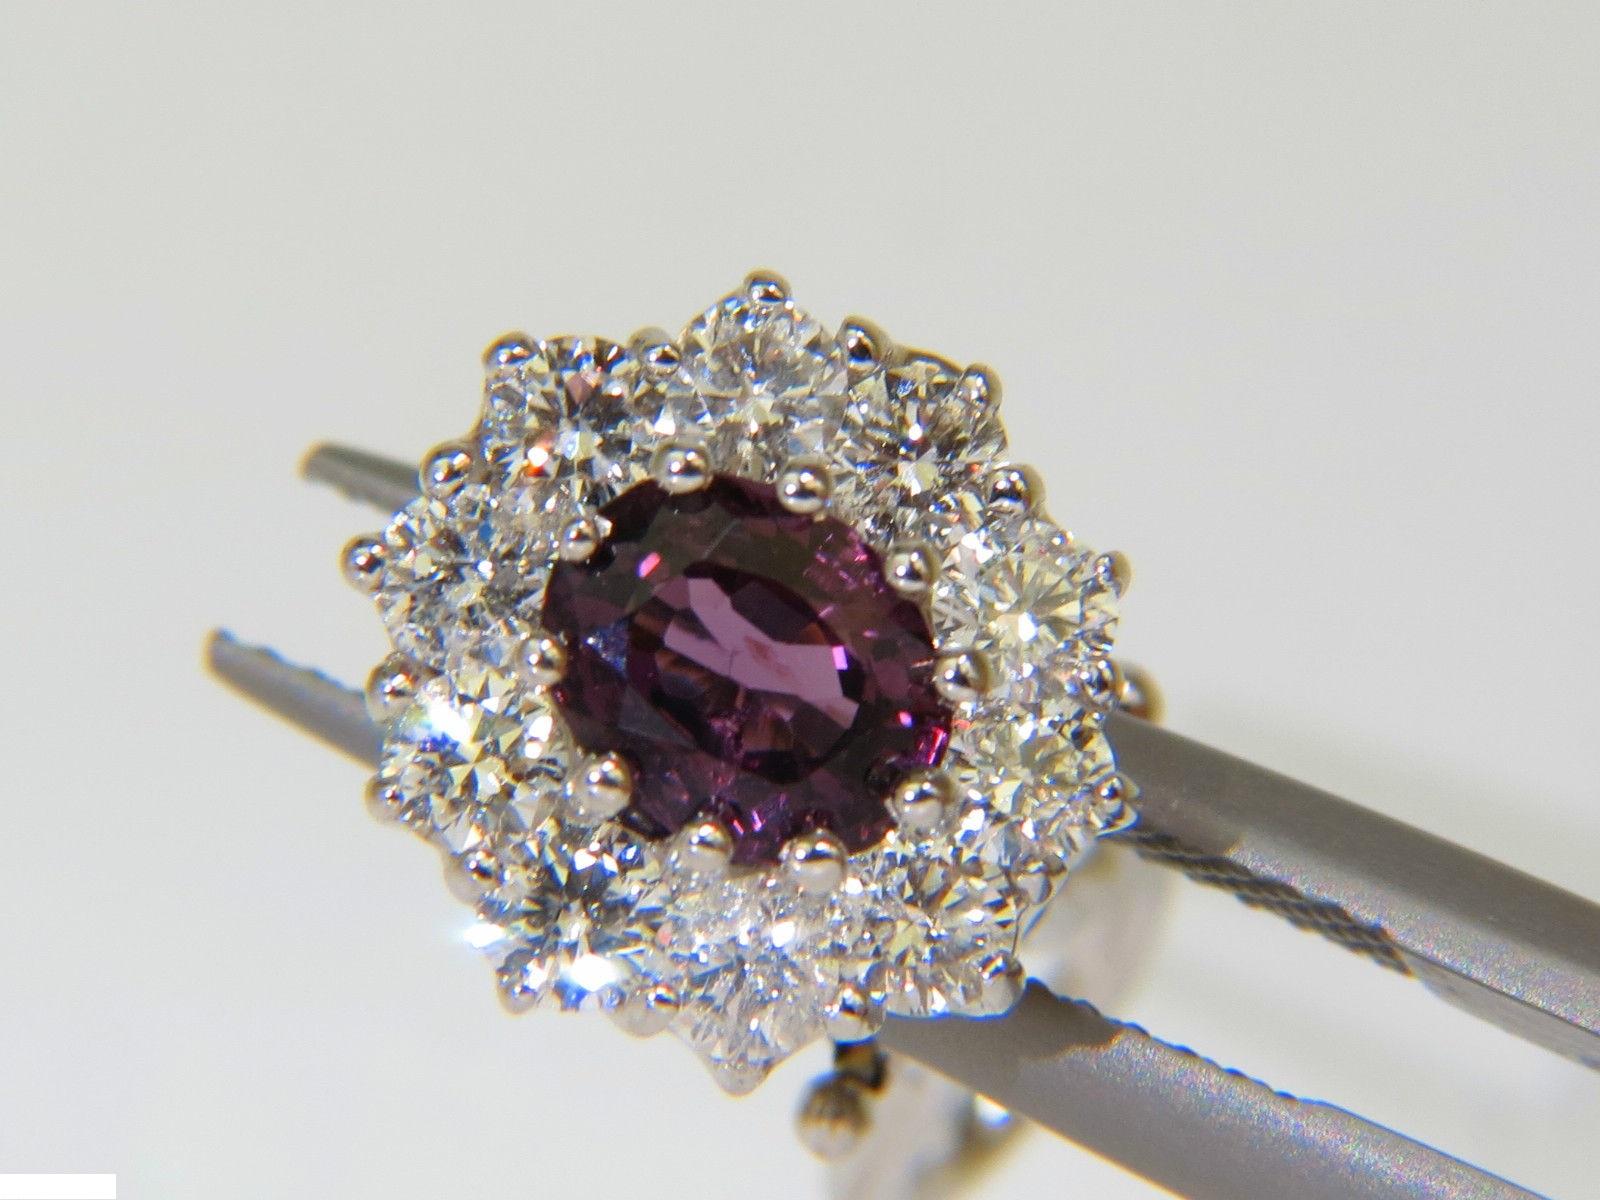 Limited Spinel Clusters 

.


1.80ct. Natural Deep Purple Spinels

Clean clarity and brilliant cut

Excellent transparency

6 X 5 mm 

& additional 1.56ct. Round diamonds

H-color, Vs-2 clarity

14kt. white gold

6.2 grams

Earrings overall: 

11 X